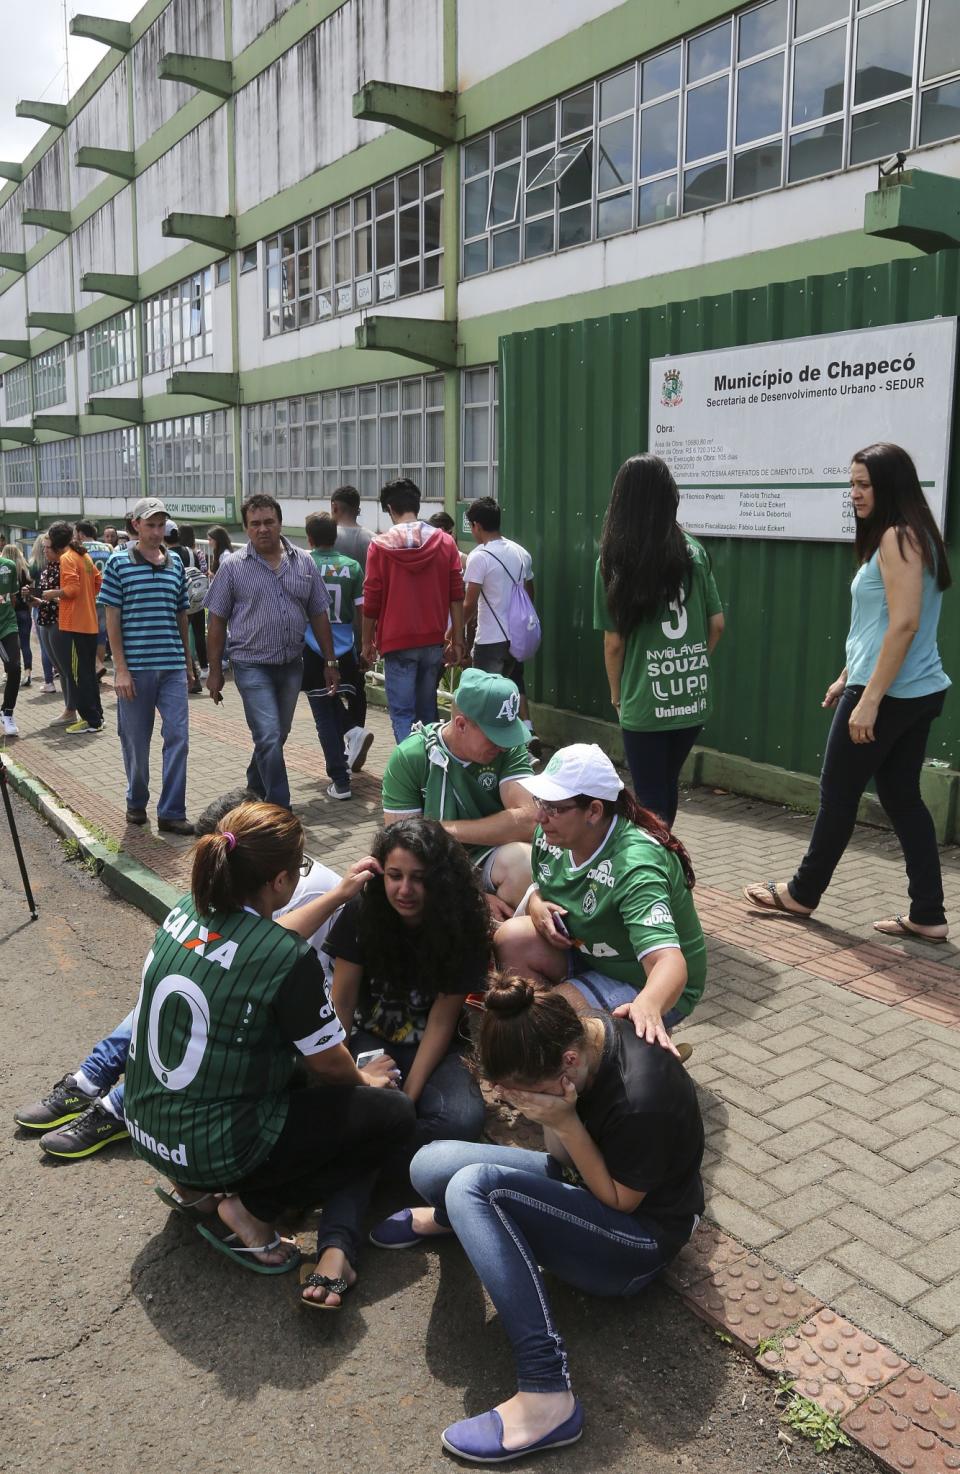 <p>Fans of Brazil’s soccer team Chapecoense gather at the Arena Conda stadium in Chapeco, Brazil, Tuesday, Nov. 29, 2016. A chartered plane that was carrying the Brazilian soccer team to the biggest match of its history crashed into a Colombian hillside and broke into pieces, killing 75 people and leaving six survivors, Colombian officials said Tuesday. (AP Photo/Andre Penner) </p>